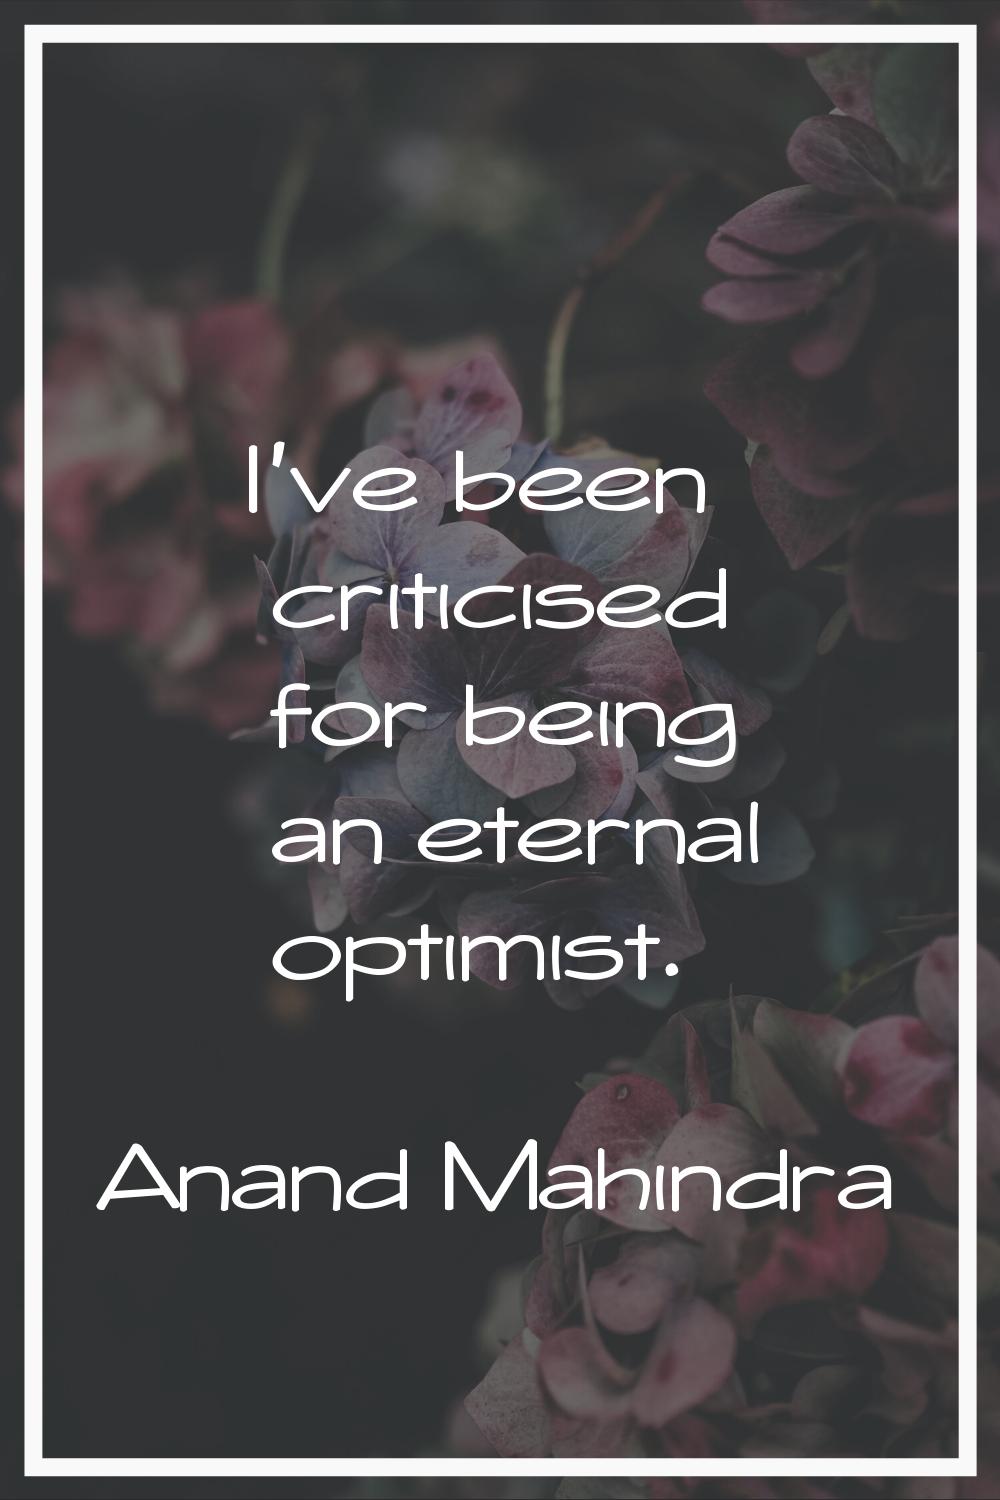 I've been criticised for being an eternal optimist.